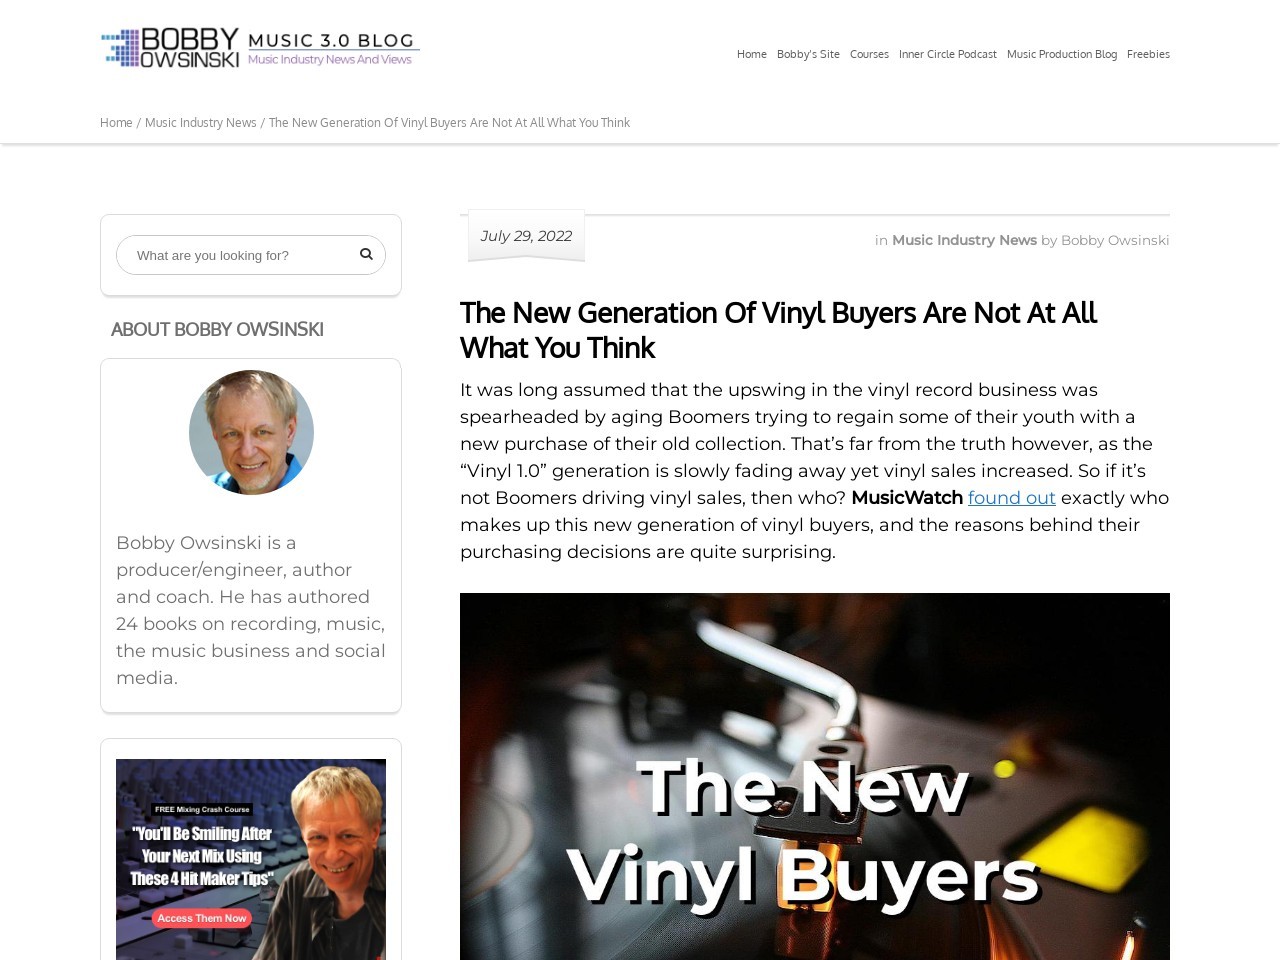 The New Generation Of Vinyl Buyers Are Not At All What You Think - Music 3.0 Music Industry Blog